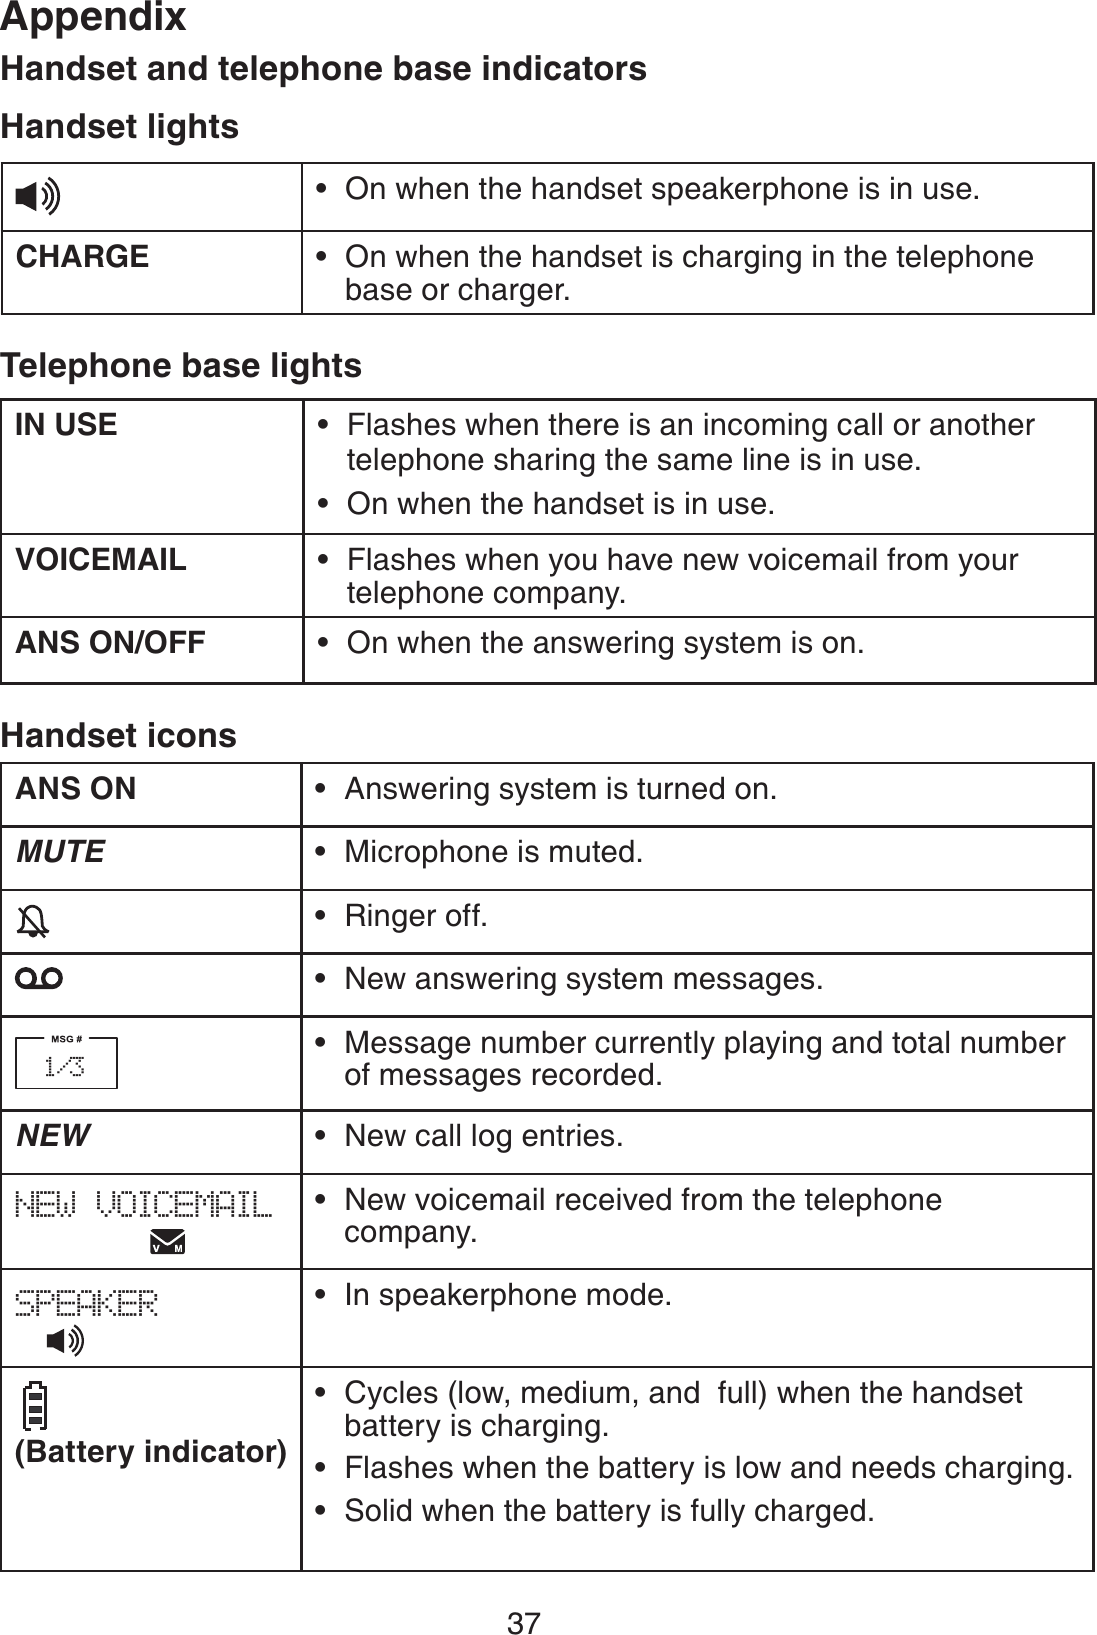 37AppendixHandset and telephone base indicatorsHandset lightsOn when the handset speakerphone is in use.•CHARGE On when the handset is charging in the telephone base or charger.•Telephone base lightsIN USE Flashes when there is an incoming call or another telephone sharing the same line is in use.On when the handset is in use.••VOICEMAIL Flashes when you have new voicemail from your telephone company.•ANS ON/OFF On when the answering system is on.•ANS ON Answering system is turned on.•MUTE Microphone is muted.•Ringer off.•New answering system messages.•Message number currently playing and total number of messages recorded.•NEW New call log entries.•NEW VOICEMAIL            New voicemail received from the telephone company.•SPEAKER  In speakerphone mode.•  (Battery indicator)                       Cycles (low, medium, and  full) when the handset battery is charging.Flashes when the battery is low and needs charging.Solid when the battery is fully charged.•••Handset icons1/3